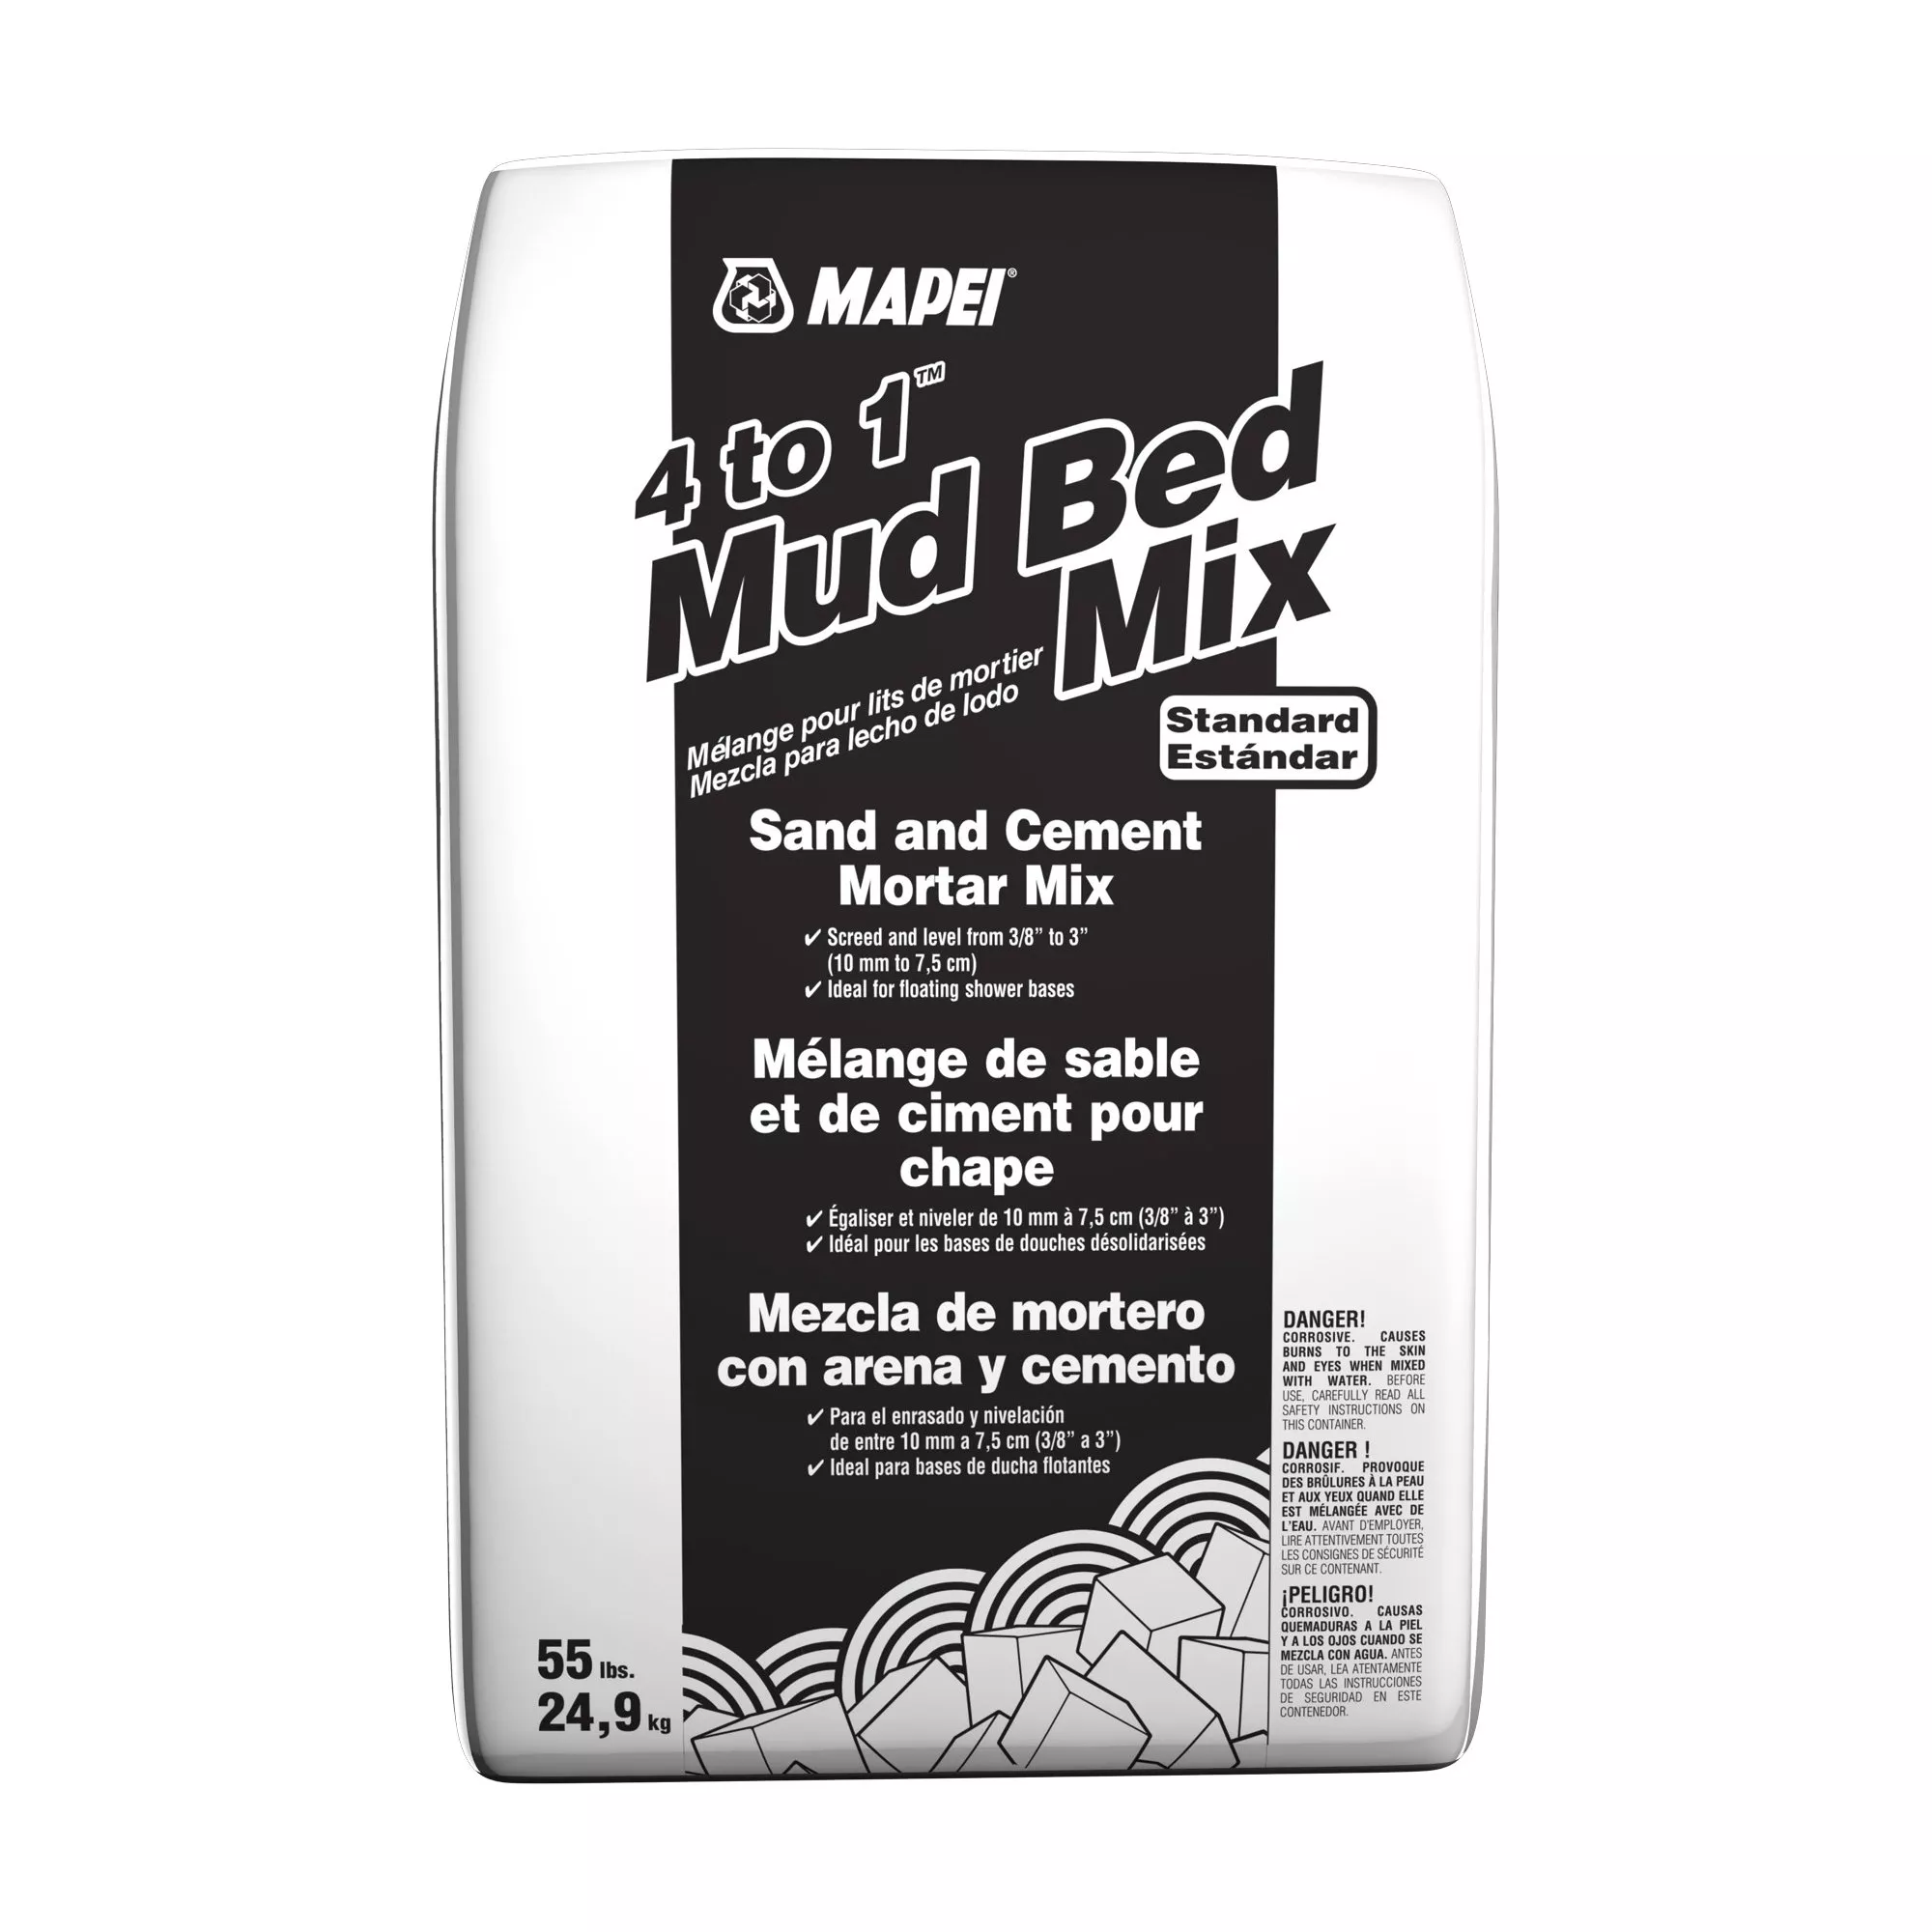 Mapei 4-to-1 Mud Bed Mix